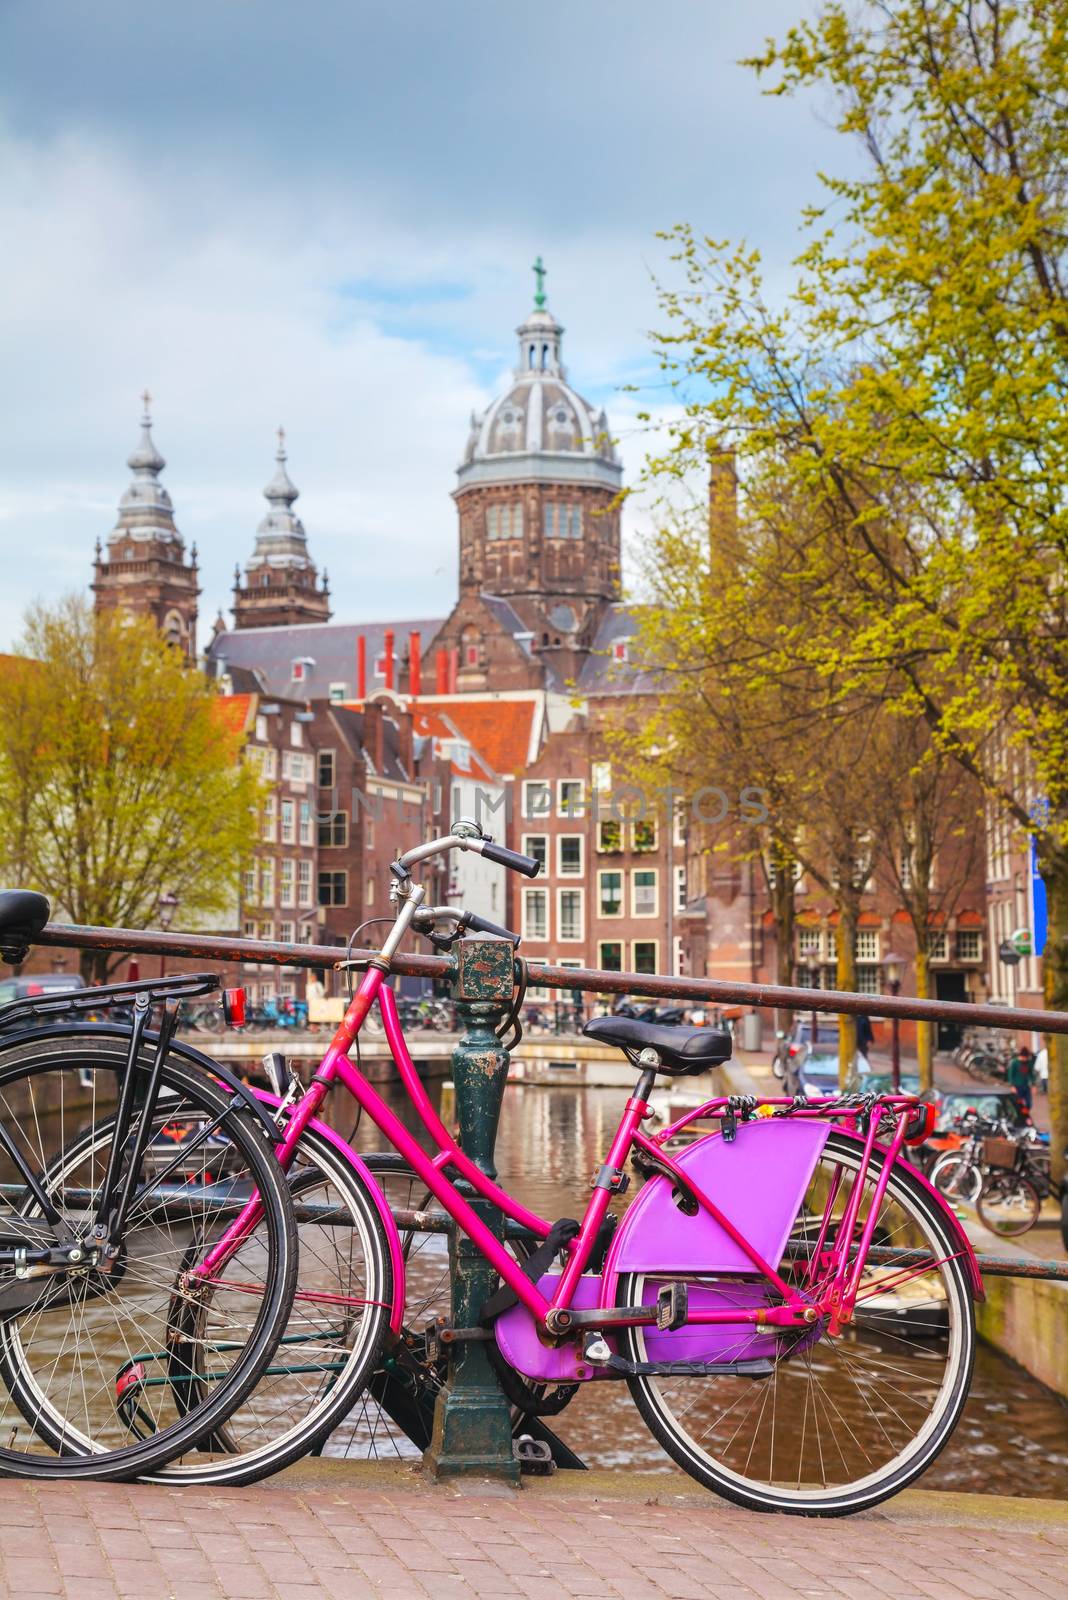 Bicycles parked at the bridge in Amsterdam by AndreyKr